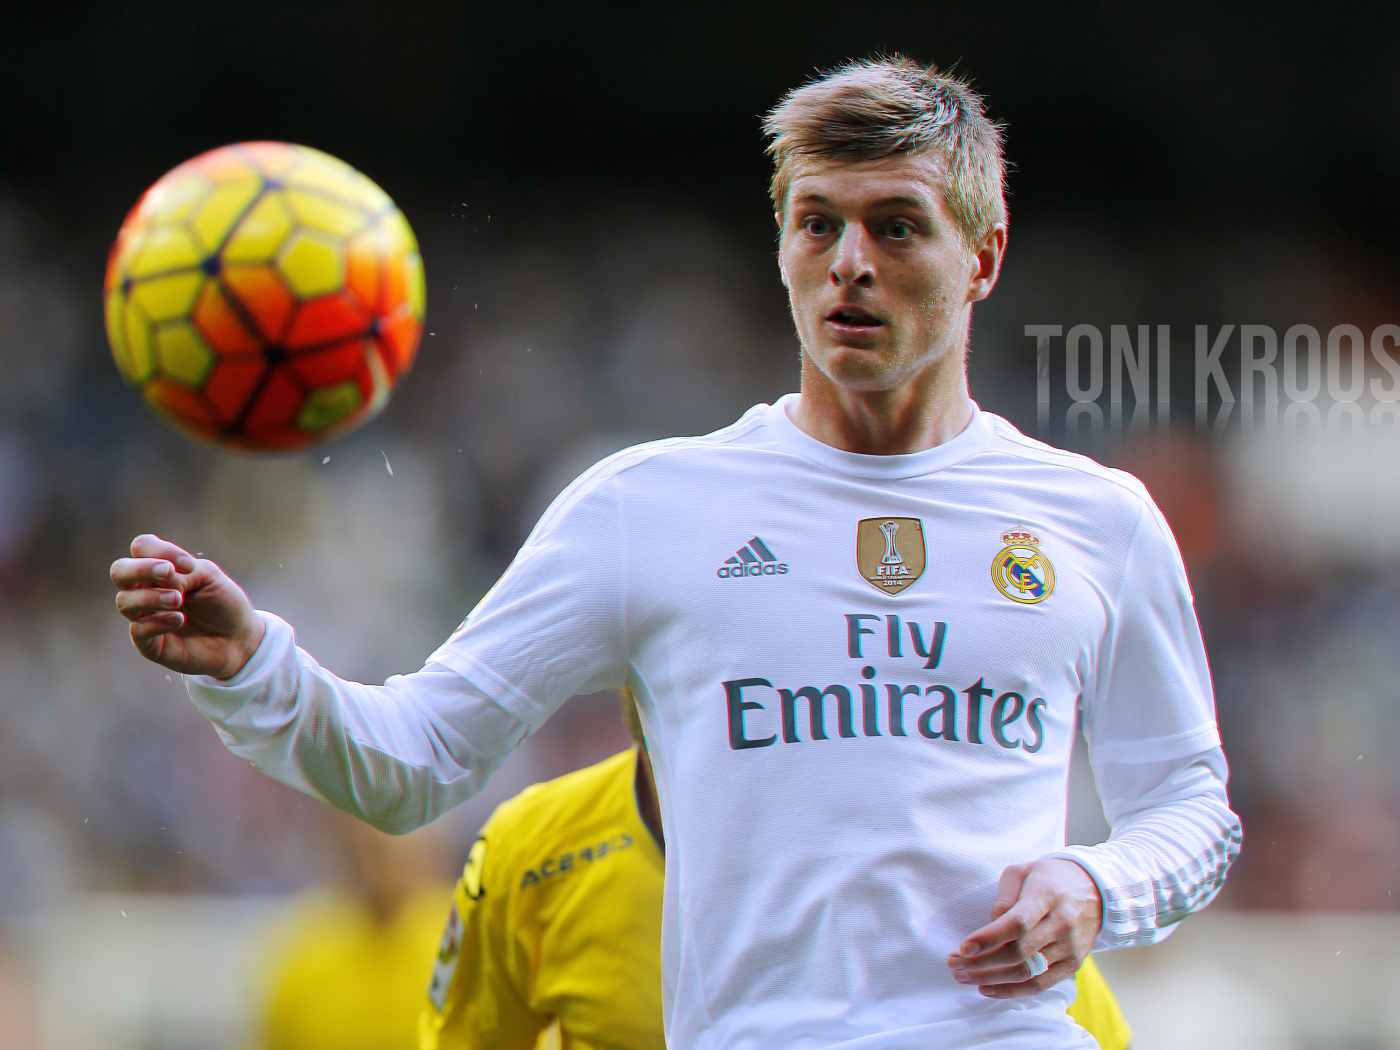 Young German football player of the club Real Madrid Tony Kroos